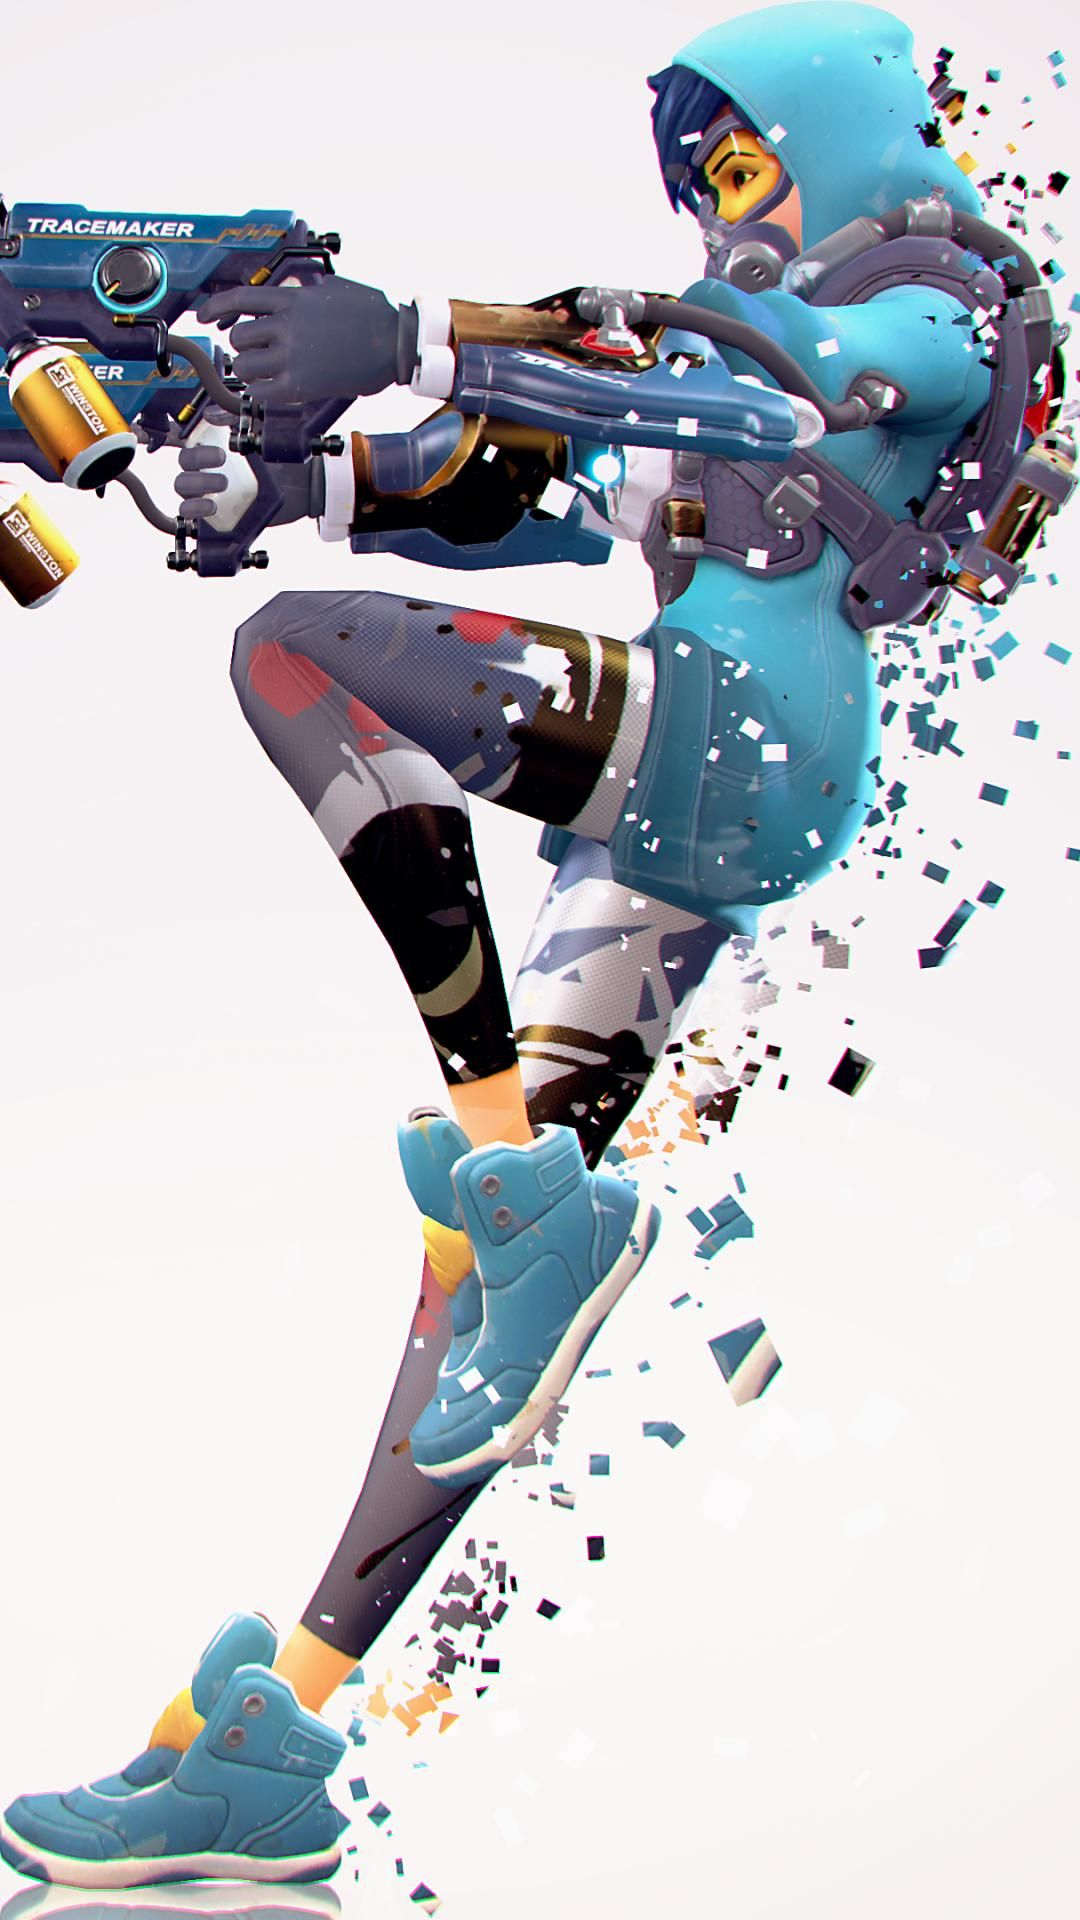 1080x1920 overwatch wallpapers 27 | Overwatch wallpapers, Overwatch tracer, Overwatch posters